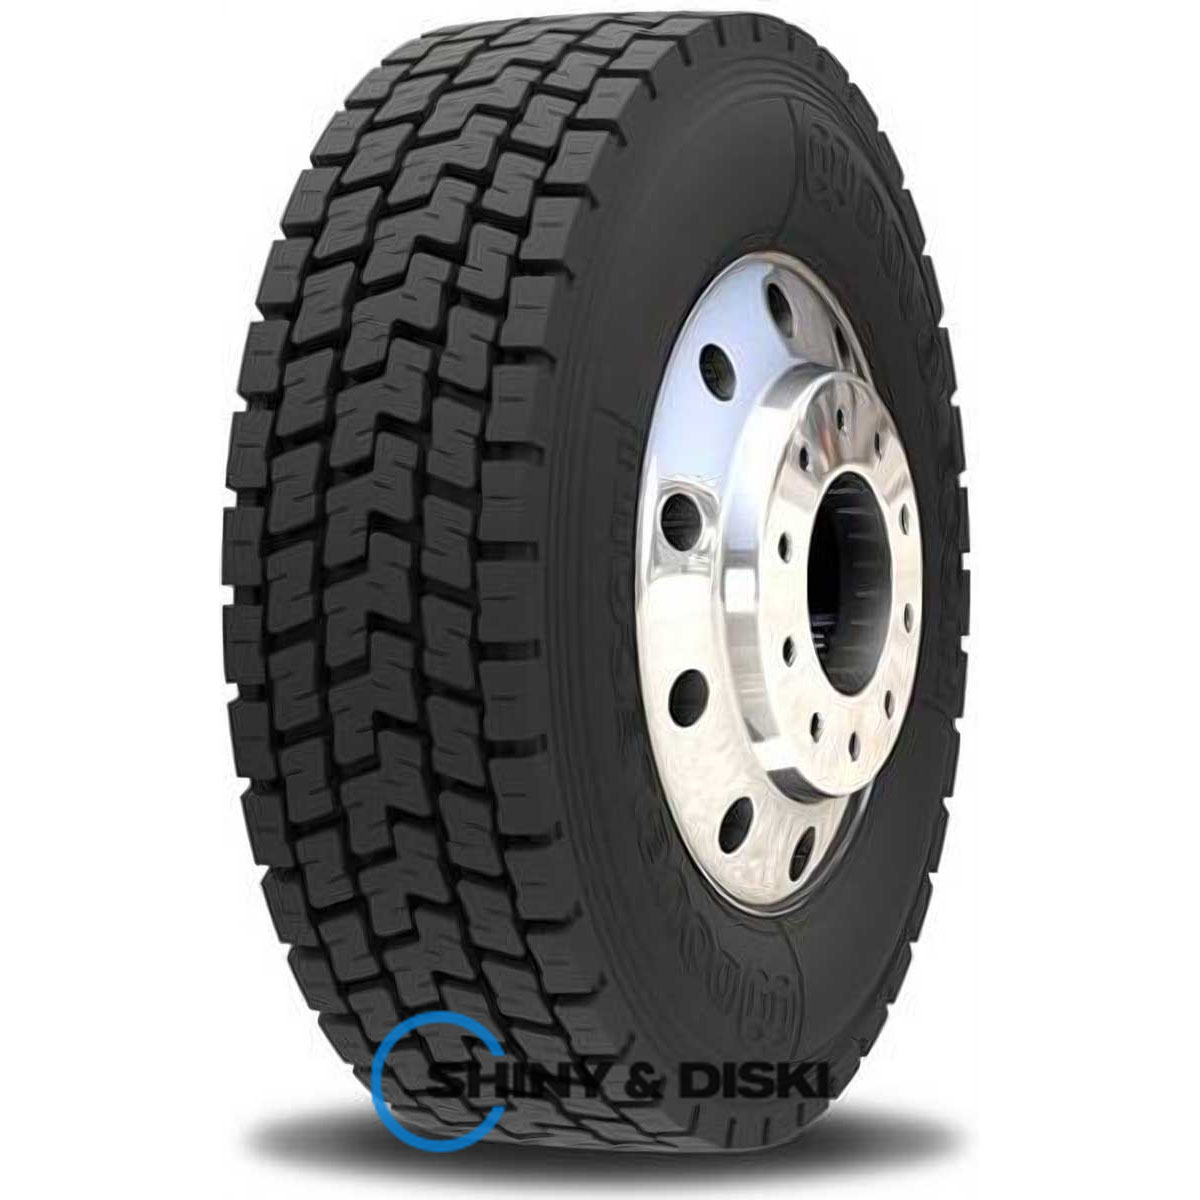 double coin rlb450 (ведущая ось) 295/60 r22.5 149/146l